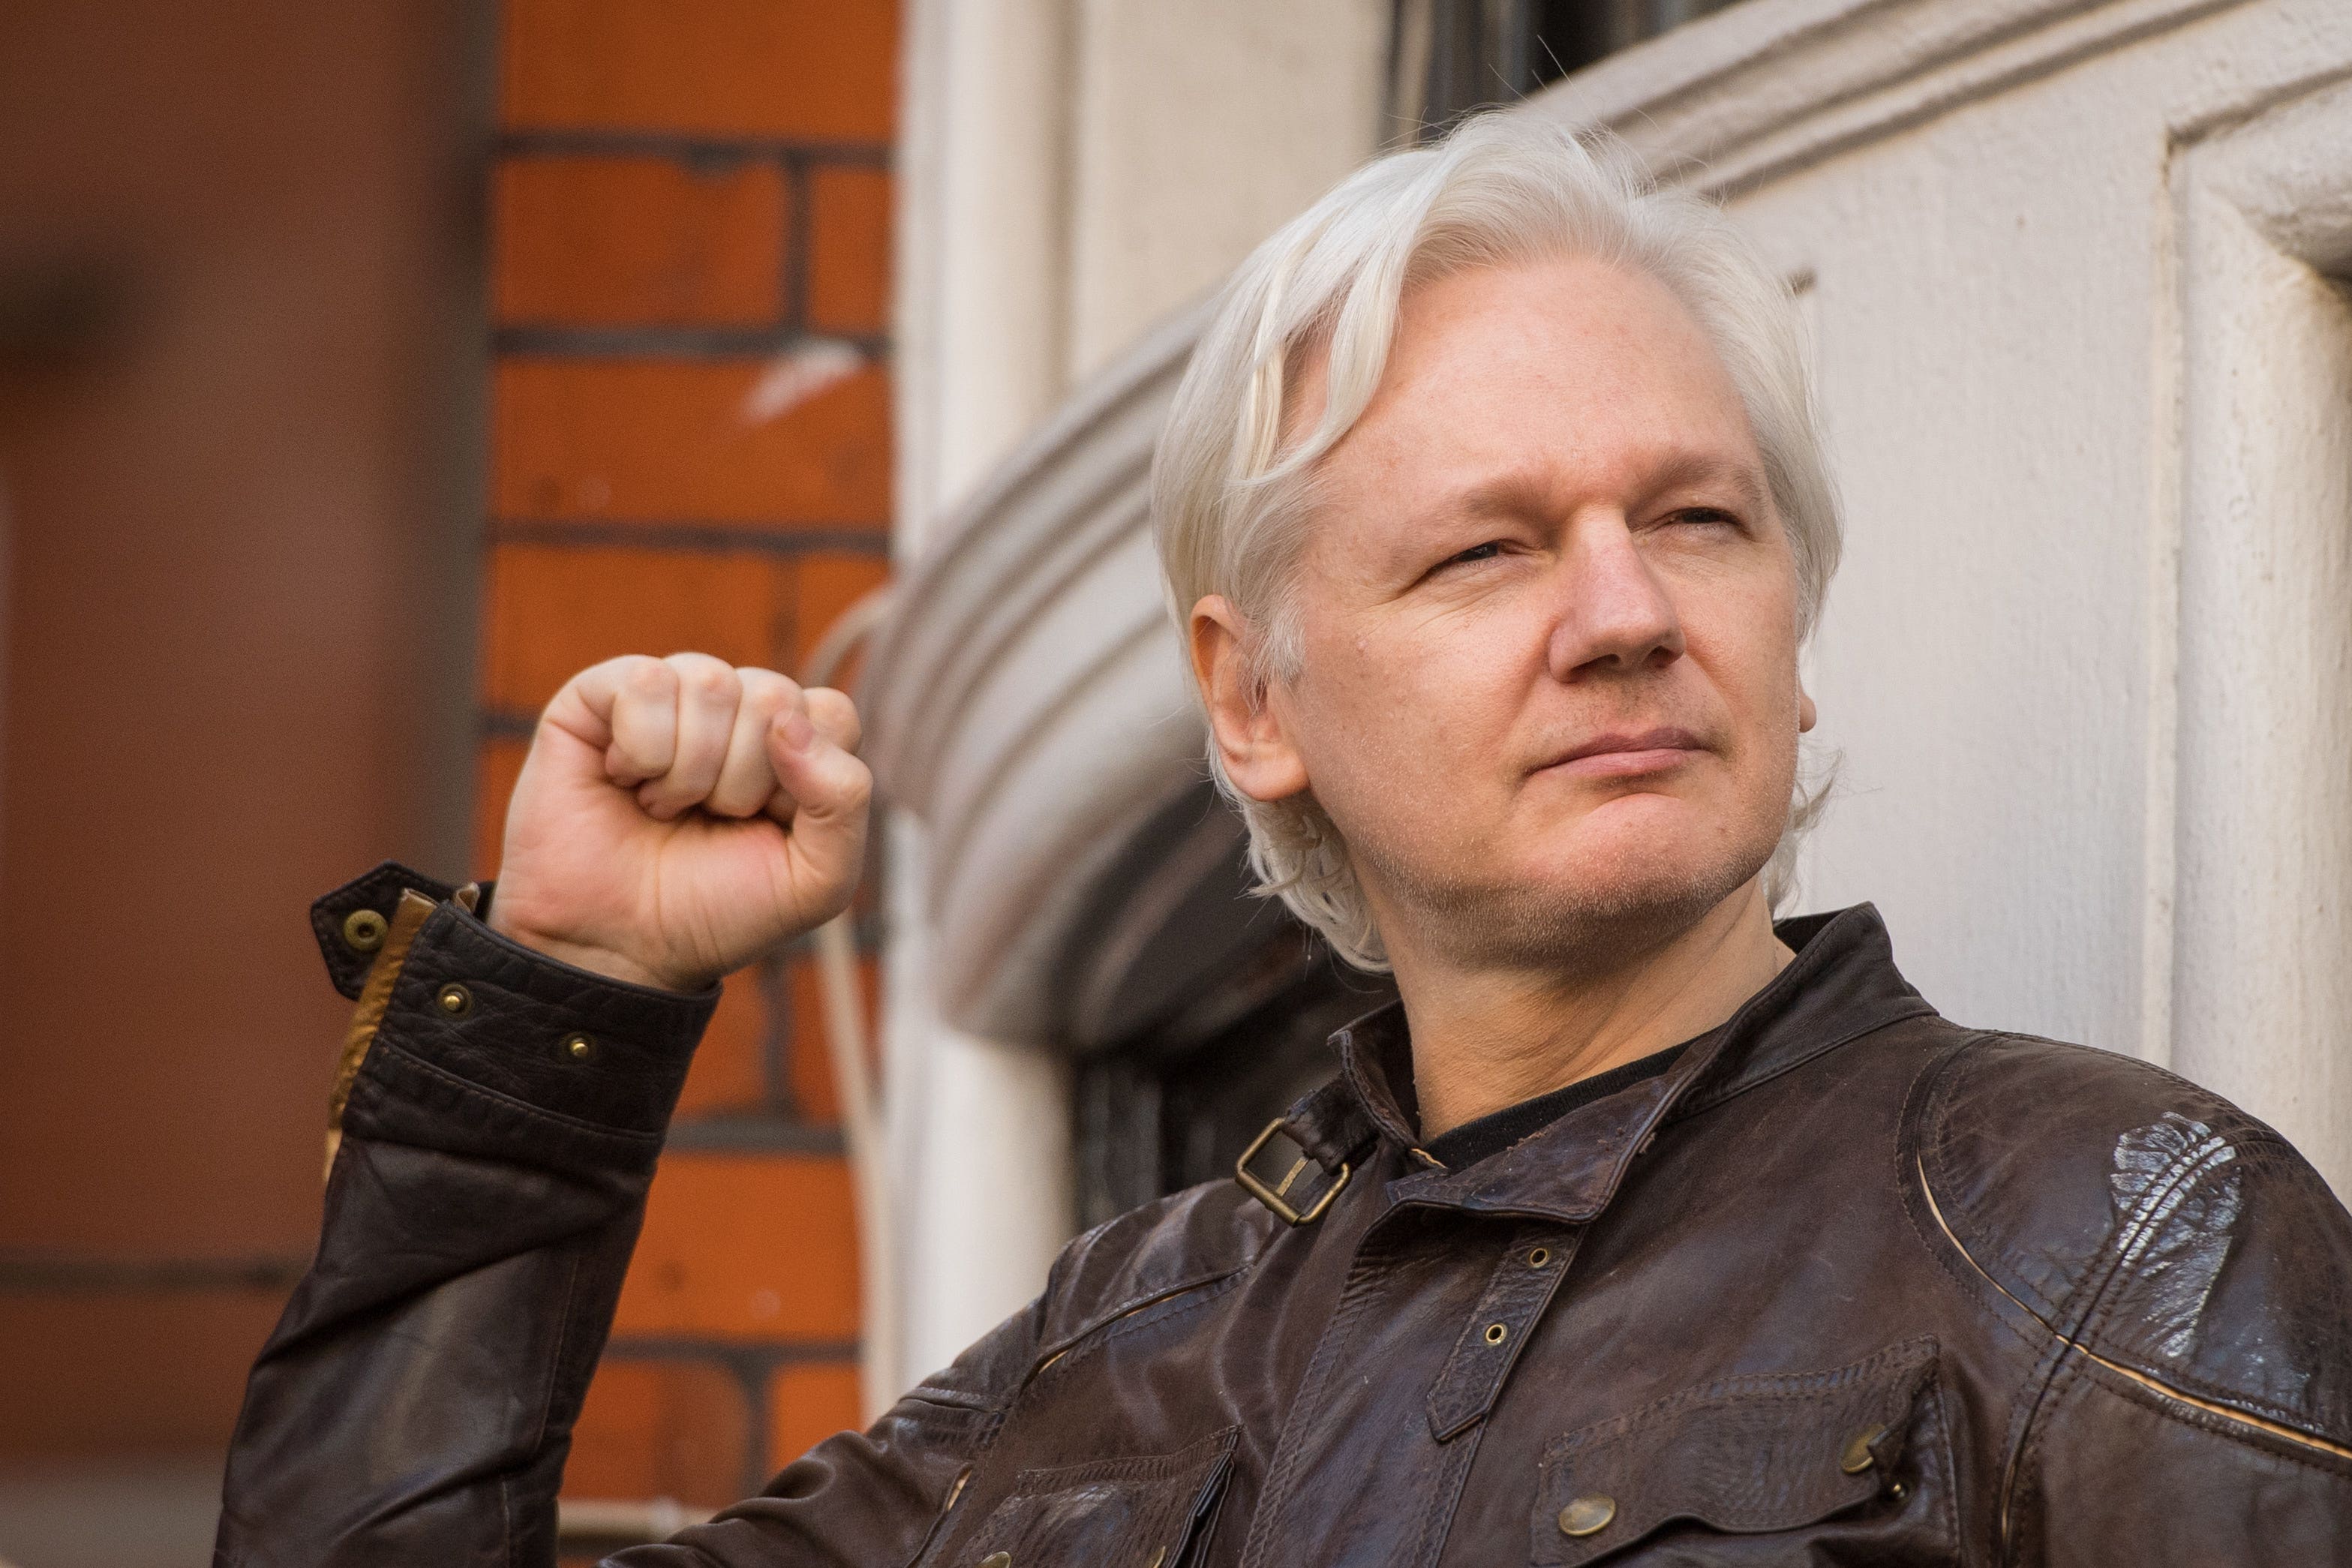 Julian Assange should be released immediately and properly compensated for his wrongful imprisonment